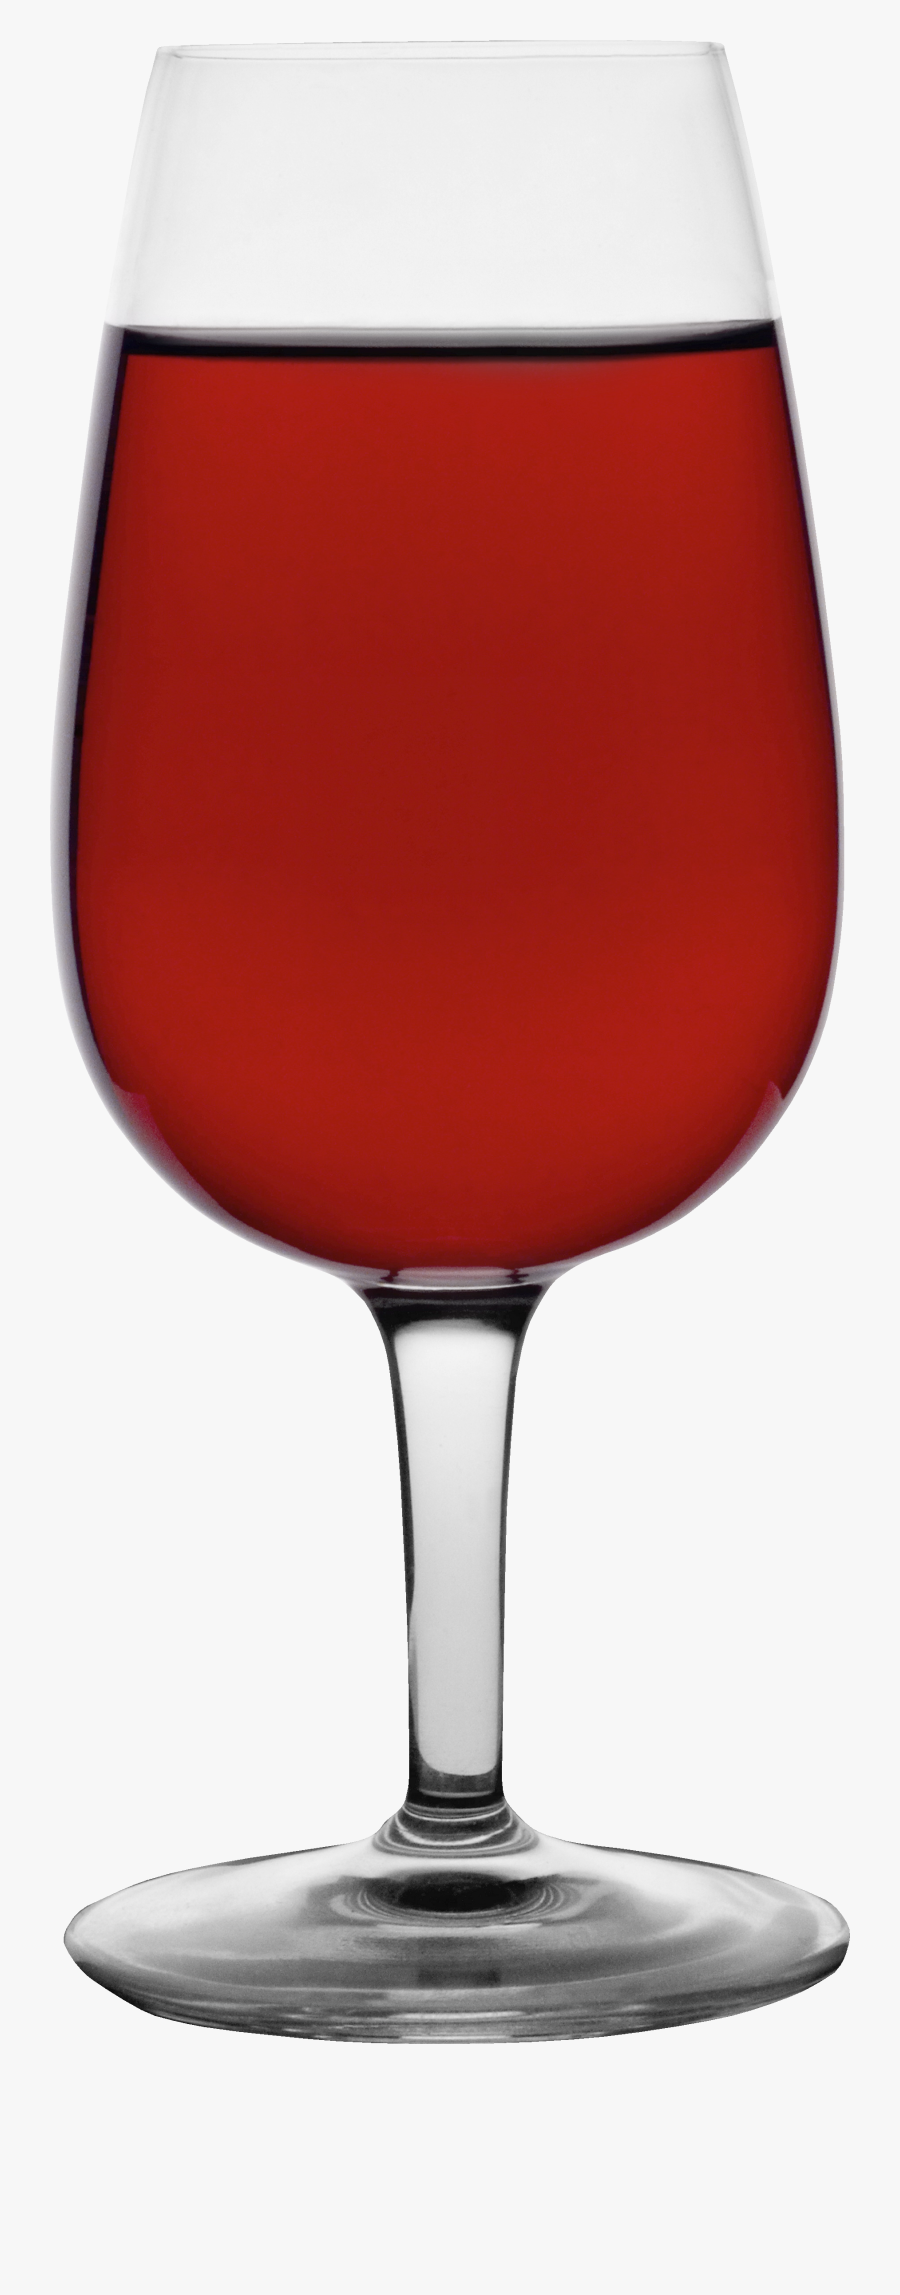 Glass Png Image - Wine Glass, Transparent Clipart